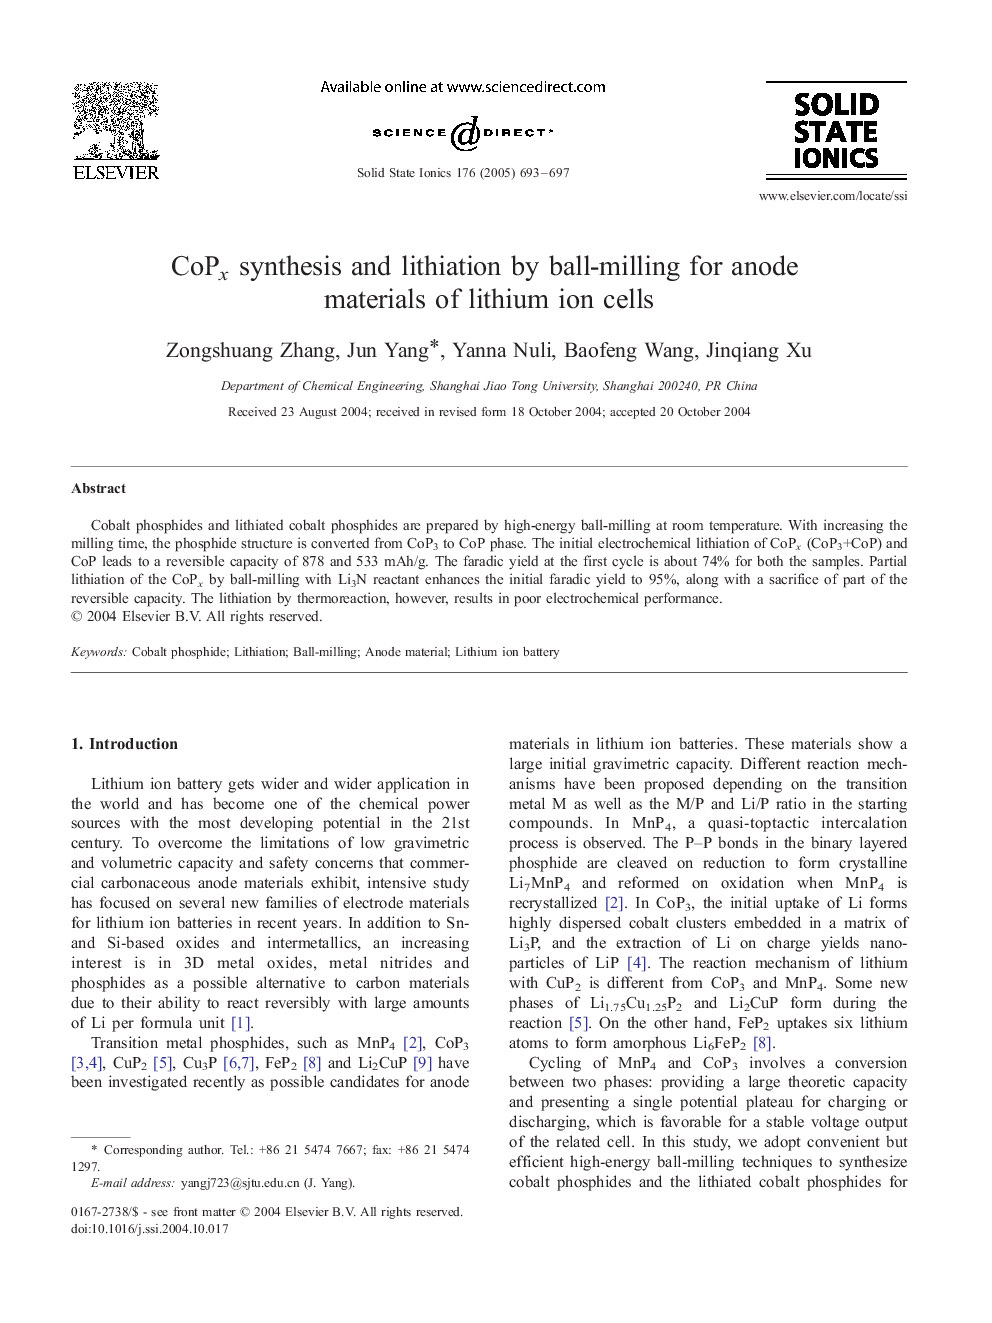 CoPx synthesis and lithiation by ball-milling for anode materials of lithium ion cells